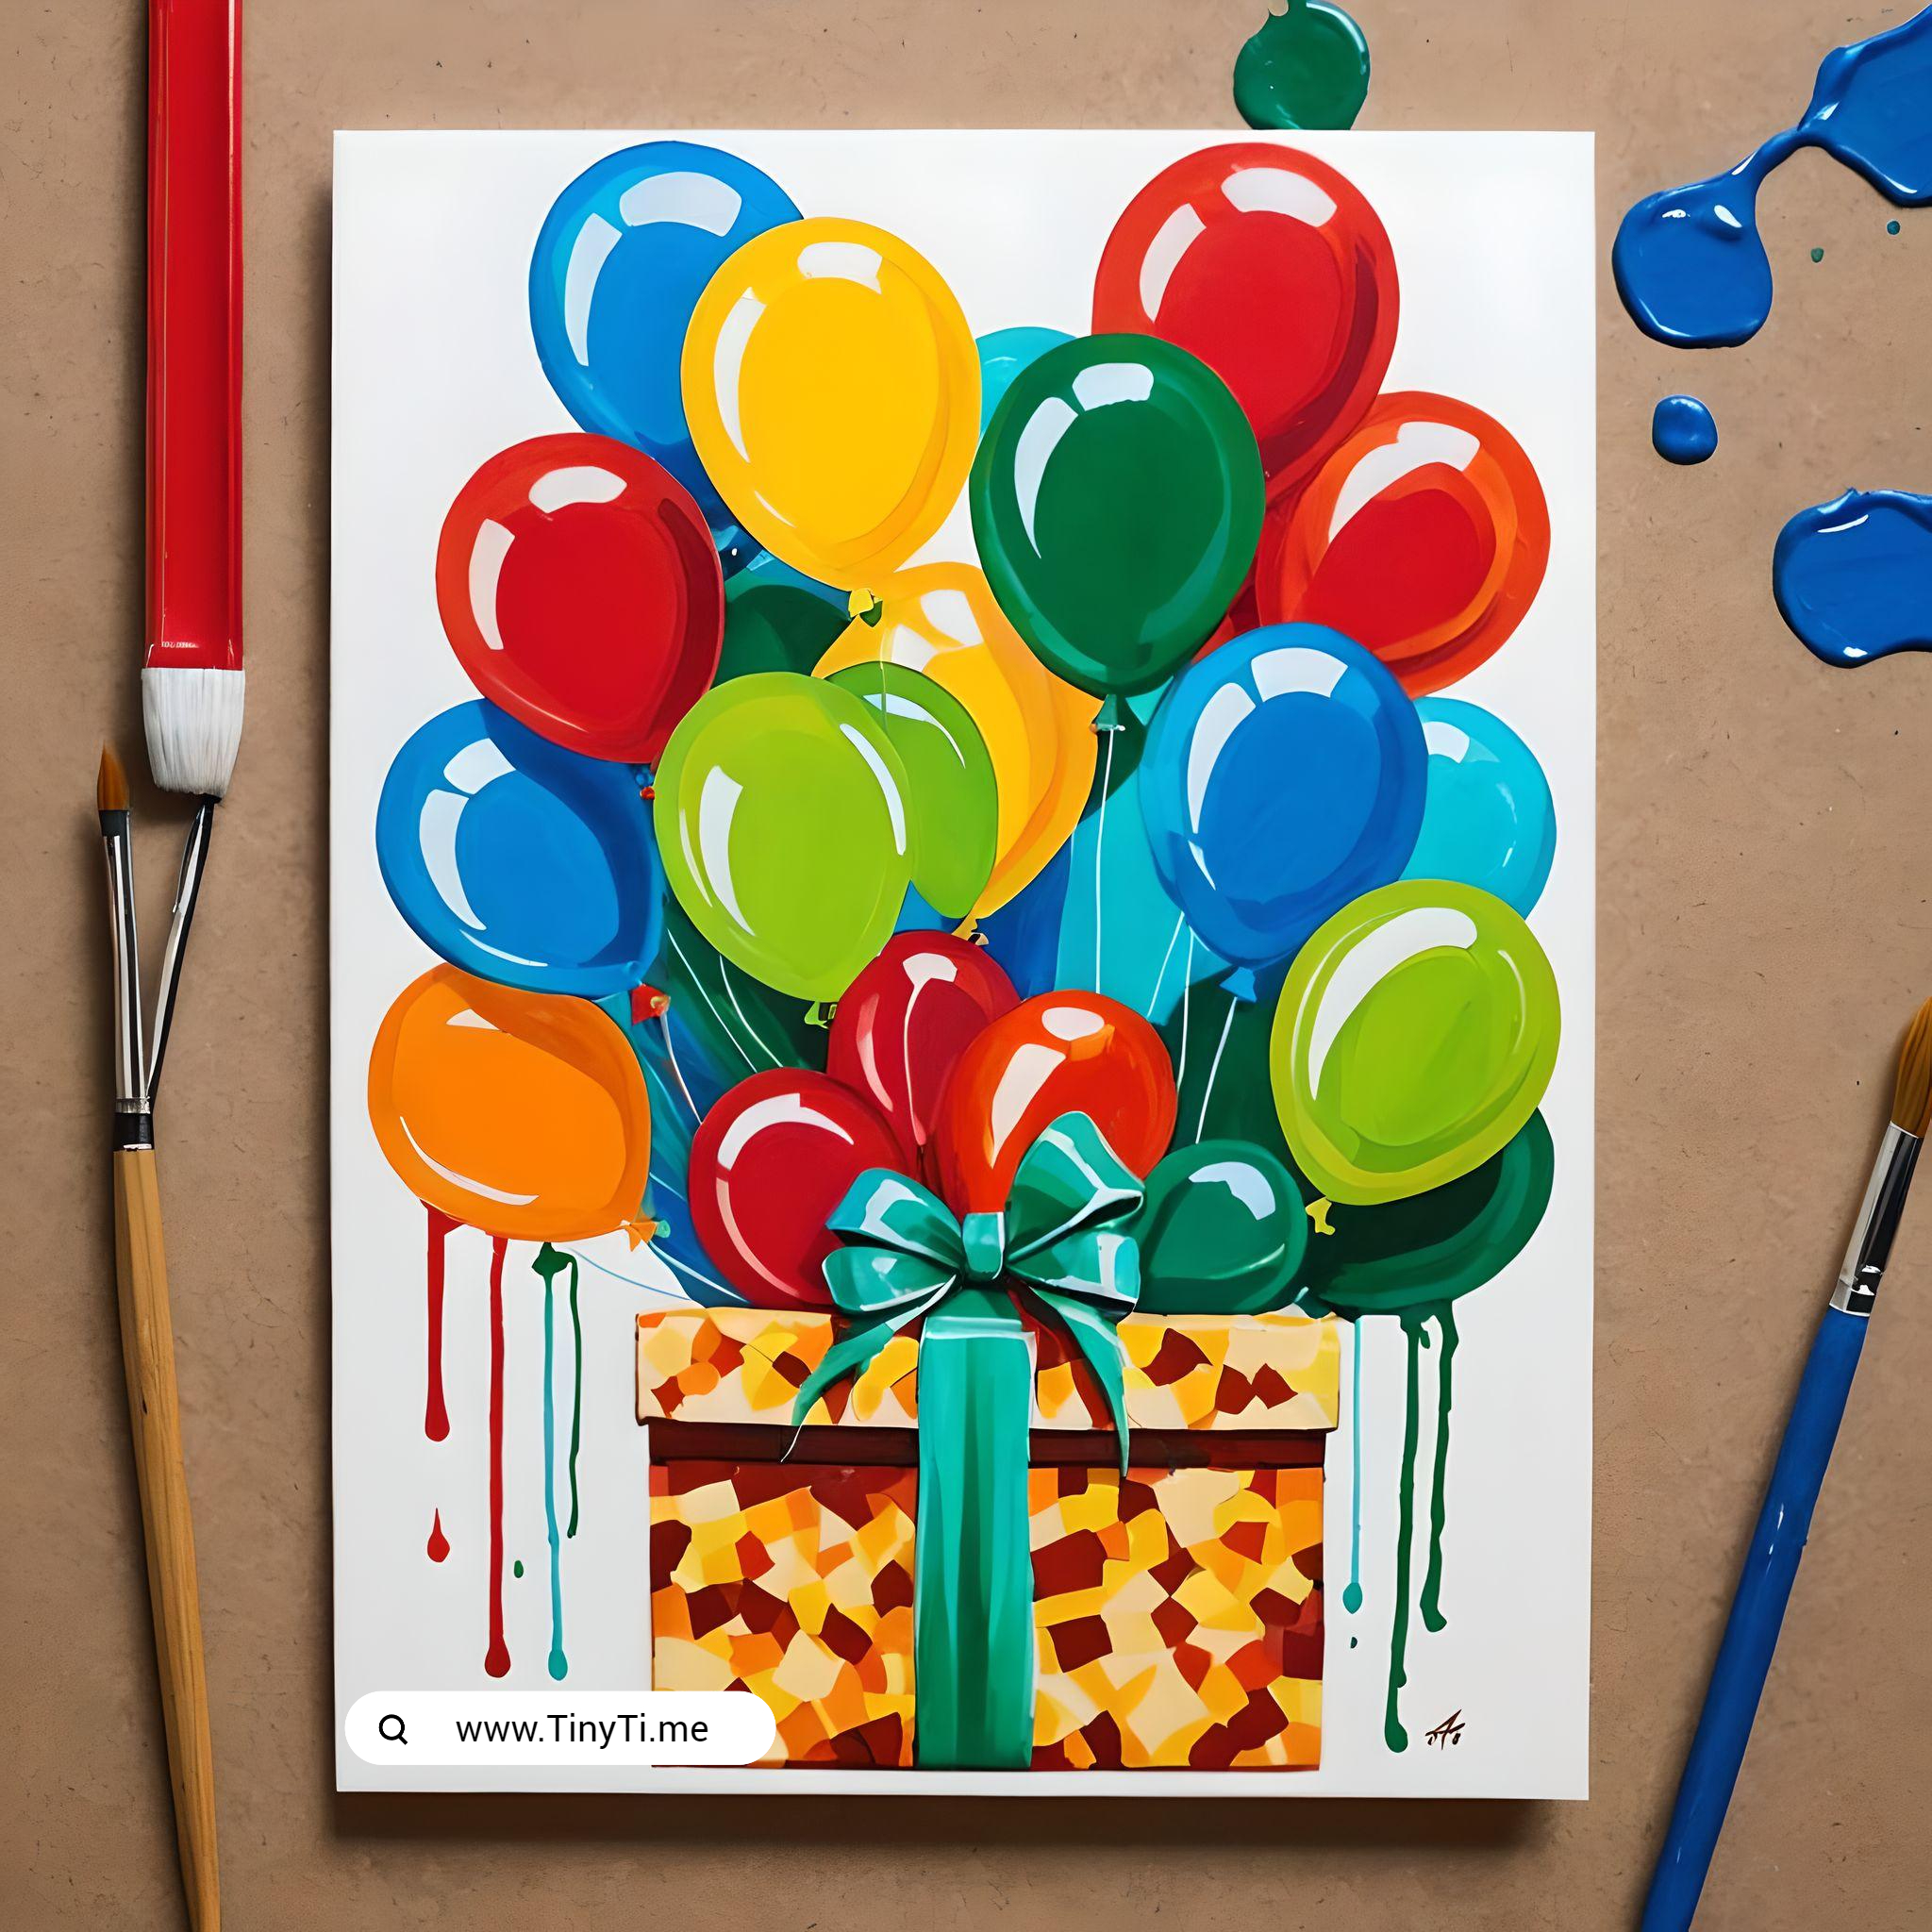 Create Your Own Free Printable Birthday Card Online!